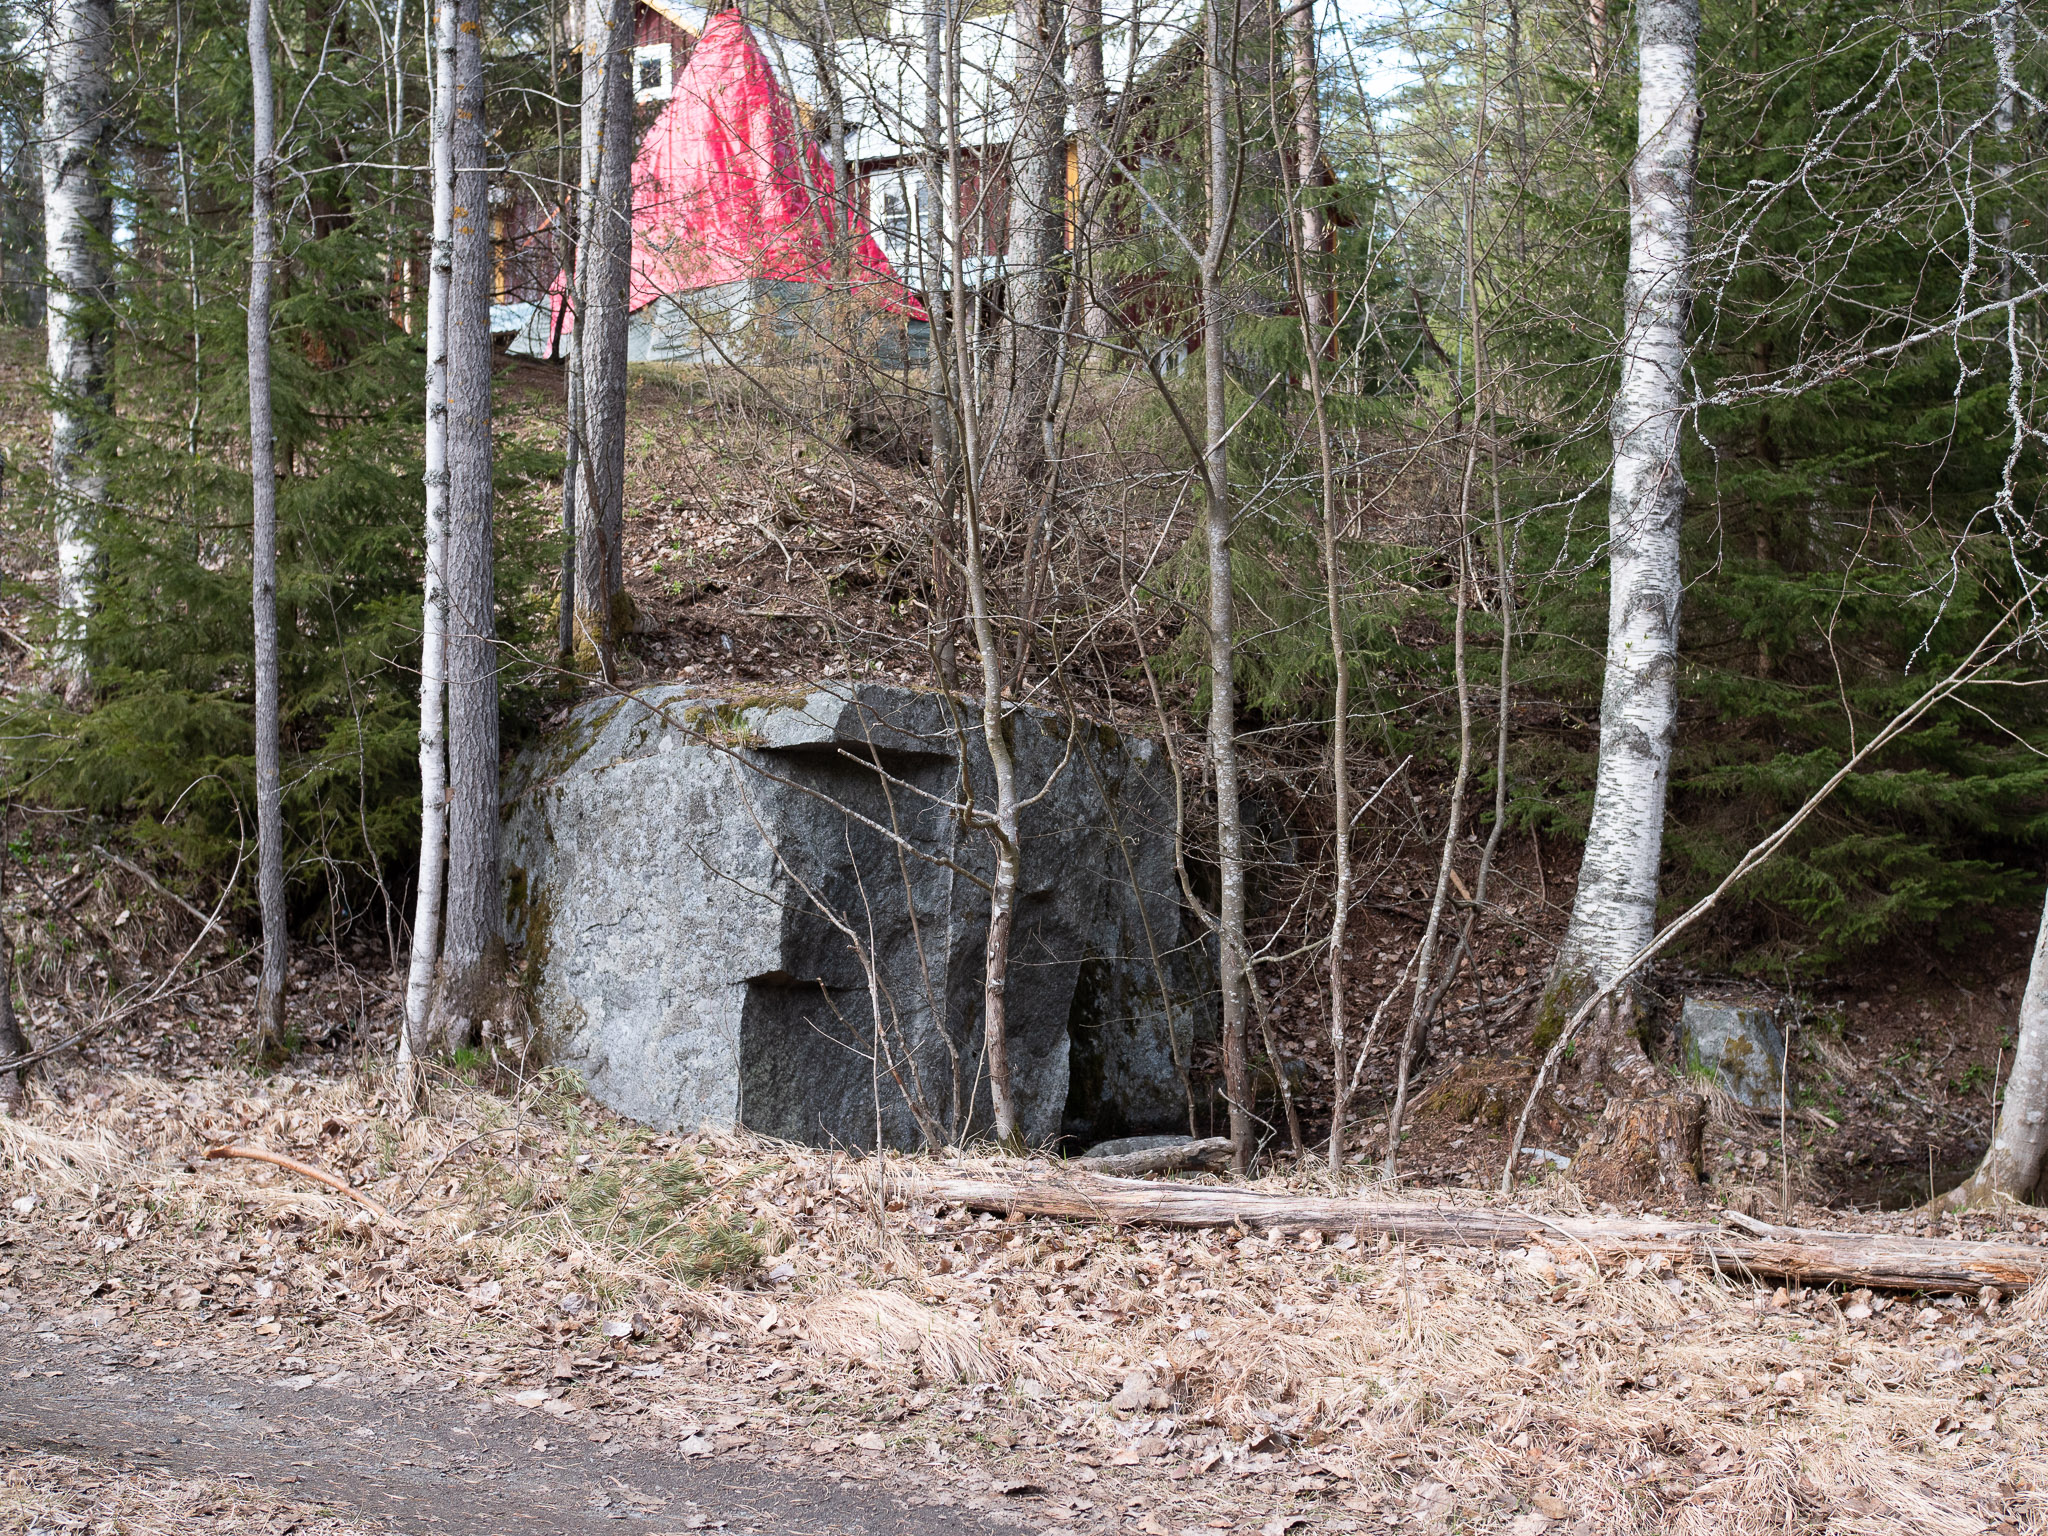 Öre, where the king's stone was cut. Photo: J Norstedt